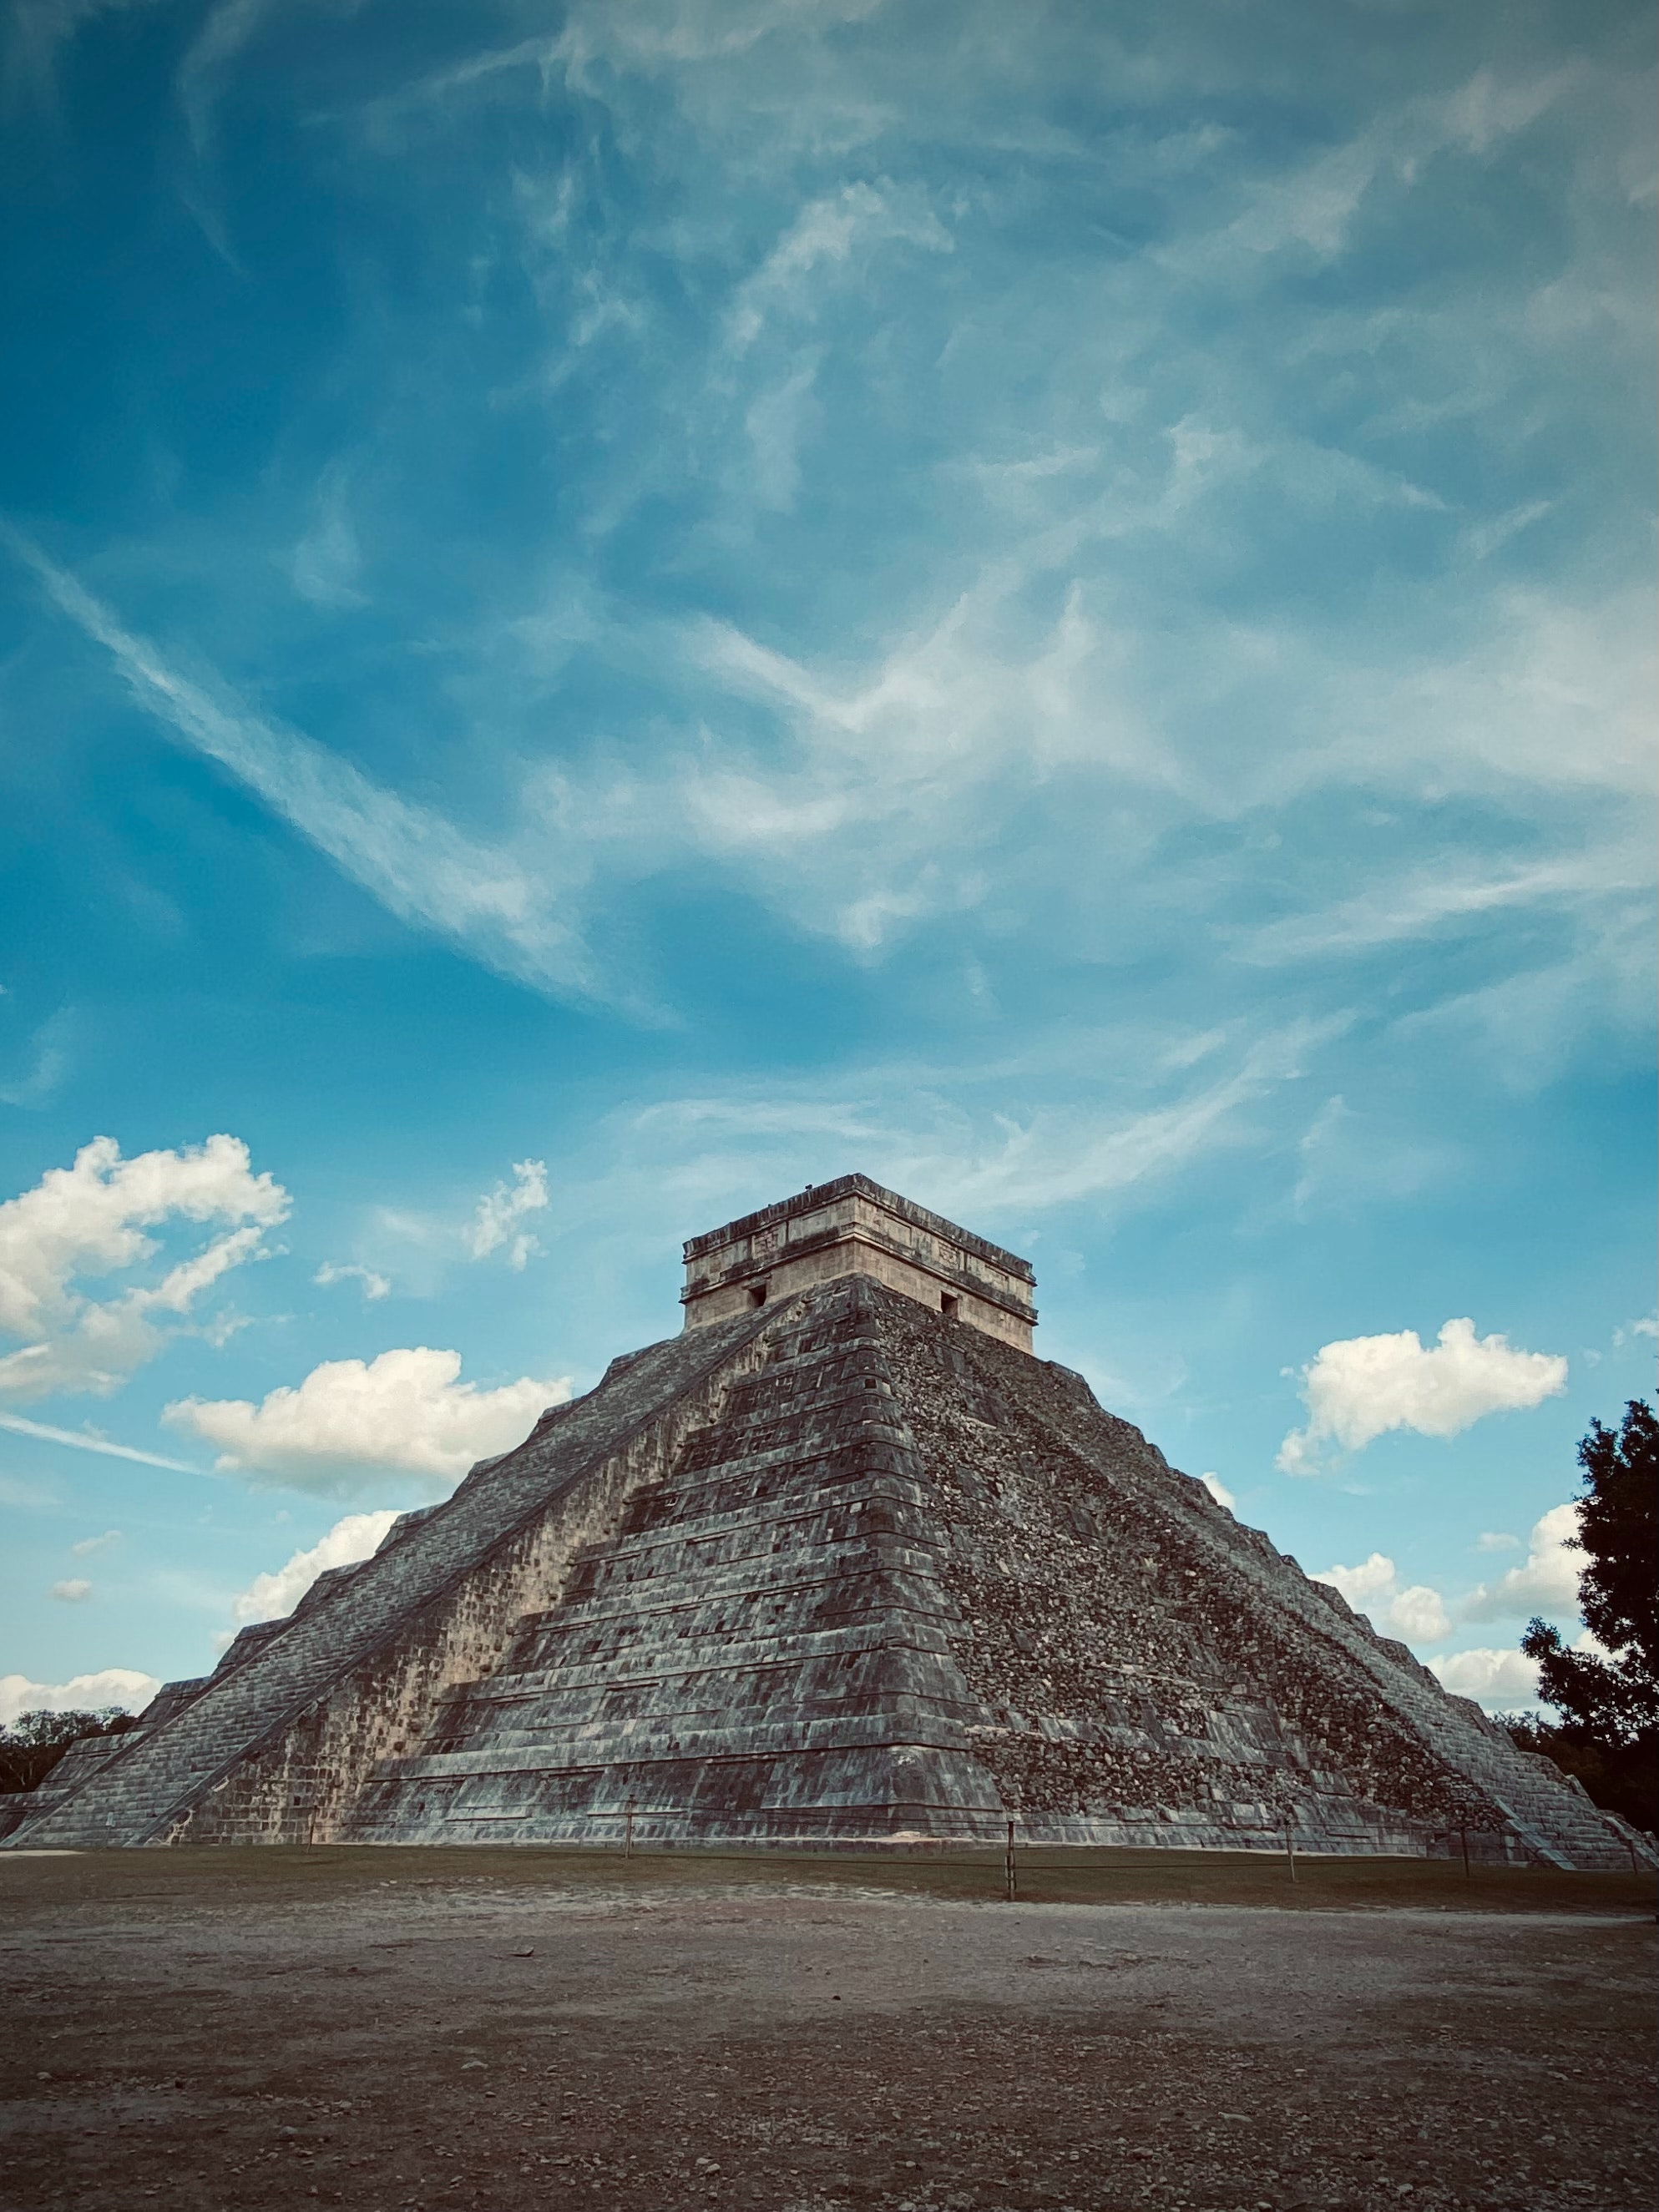 This is why you must visit Chichén Itzá at least once